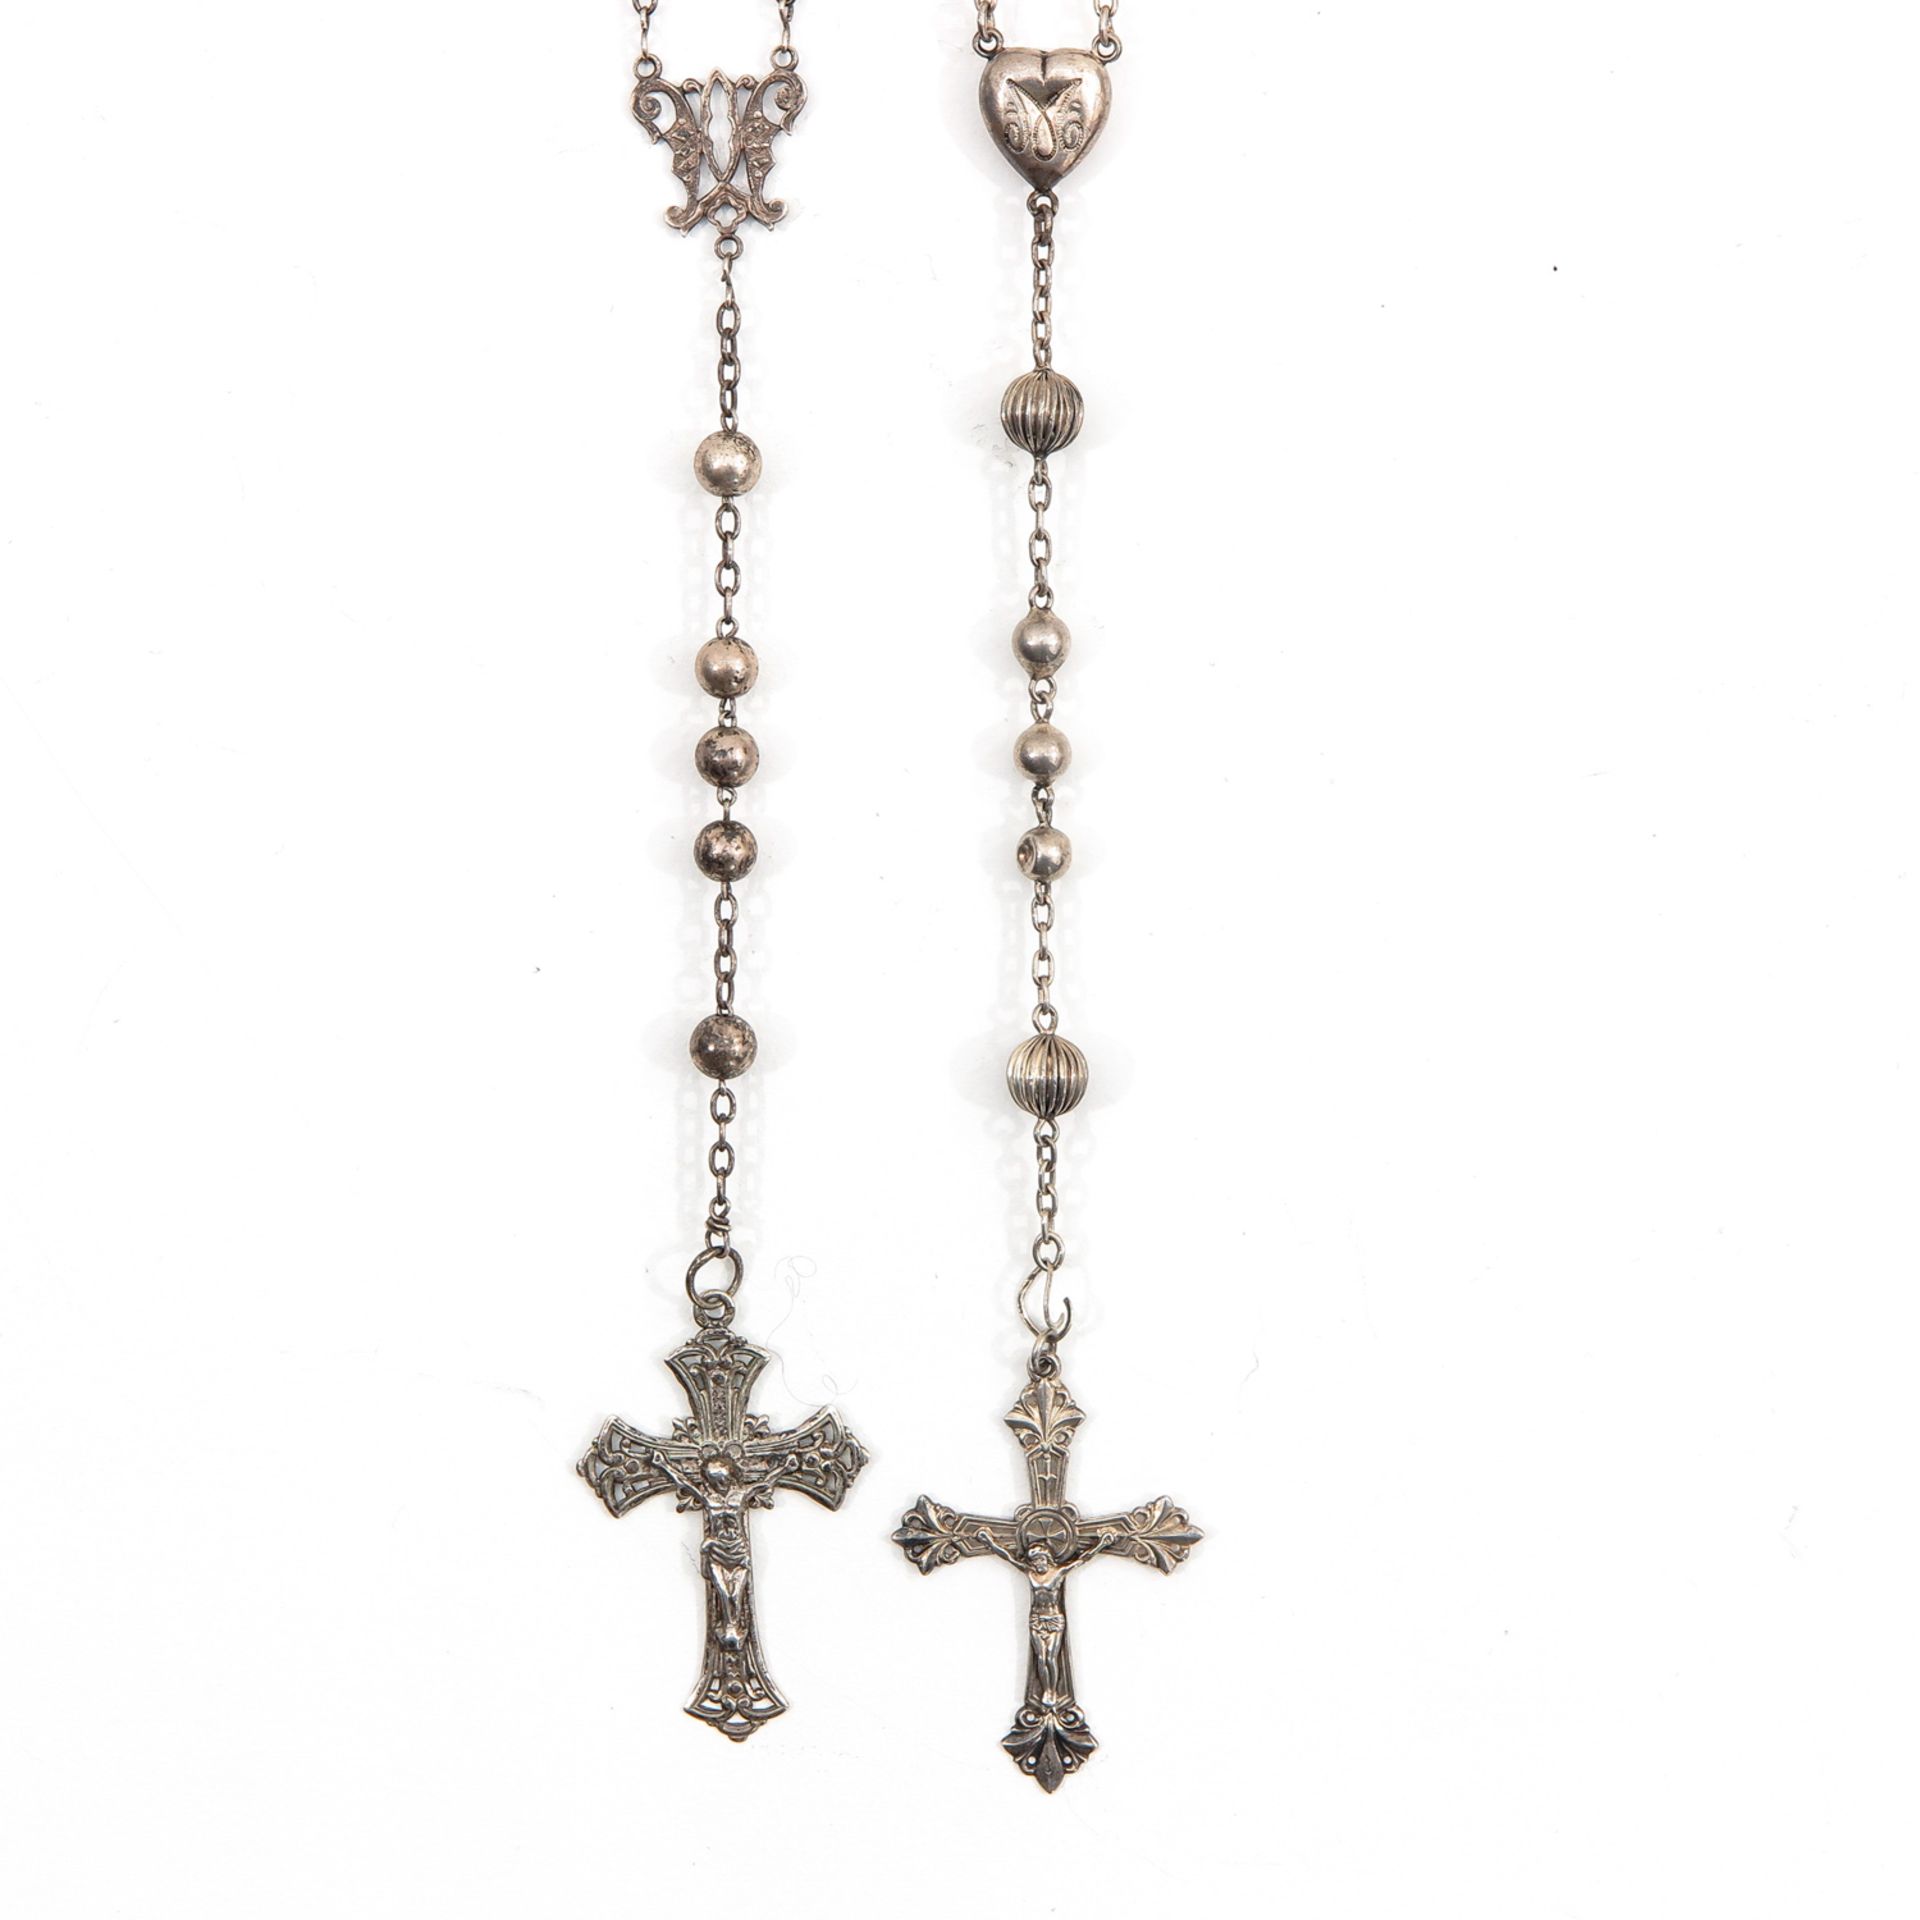 A Collection of 7 Silver Rosaries - Image 5 of 5